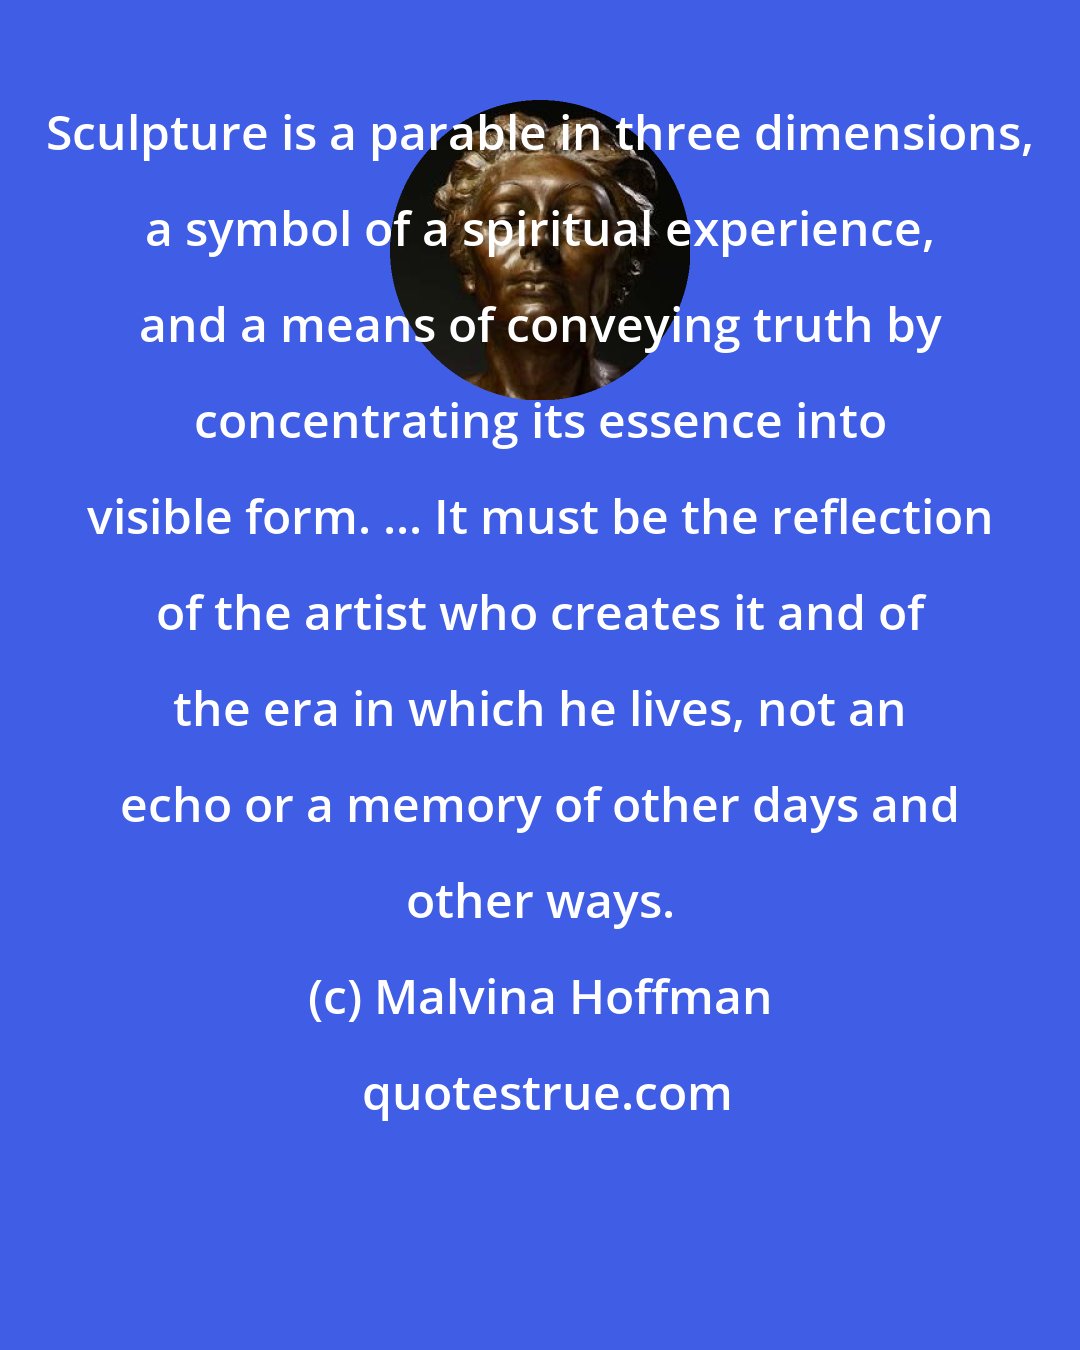 Malvina Hoffman: Sculpture is a parable in three dimensions, a symbol of a spiritual experience, and a means of conveying truth by concentrating its essence into visible form. ... It must be the reflection of the artist who creates it and of the era in which he lives, not an echo or a memory of other days and other ways.